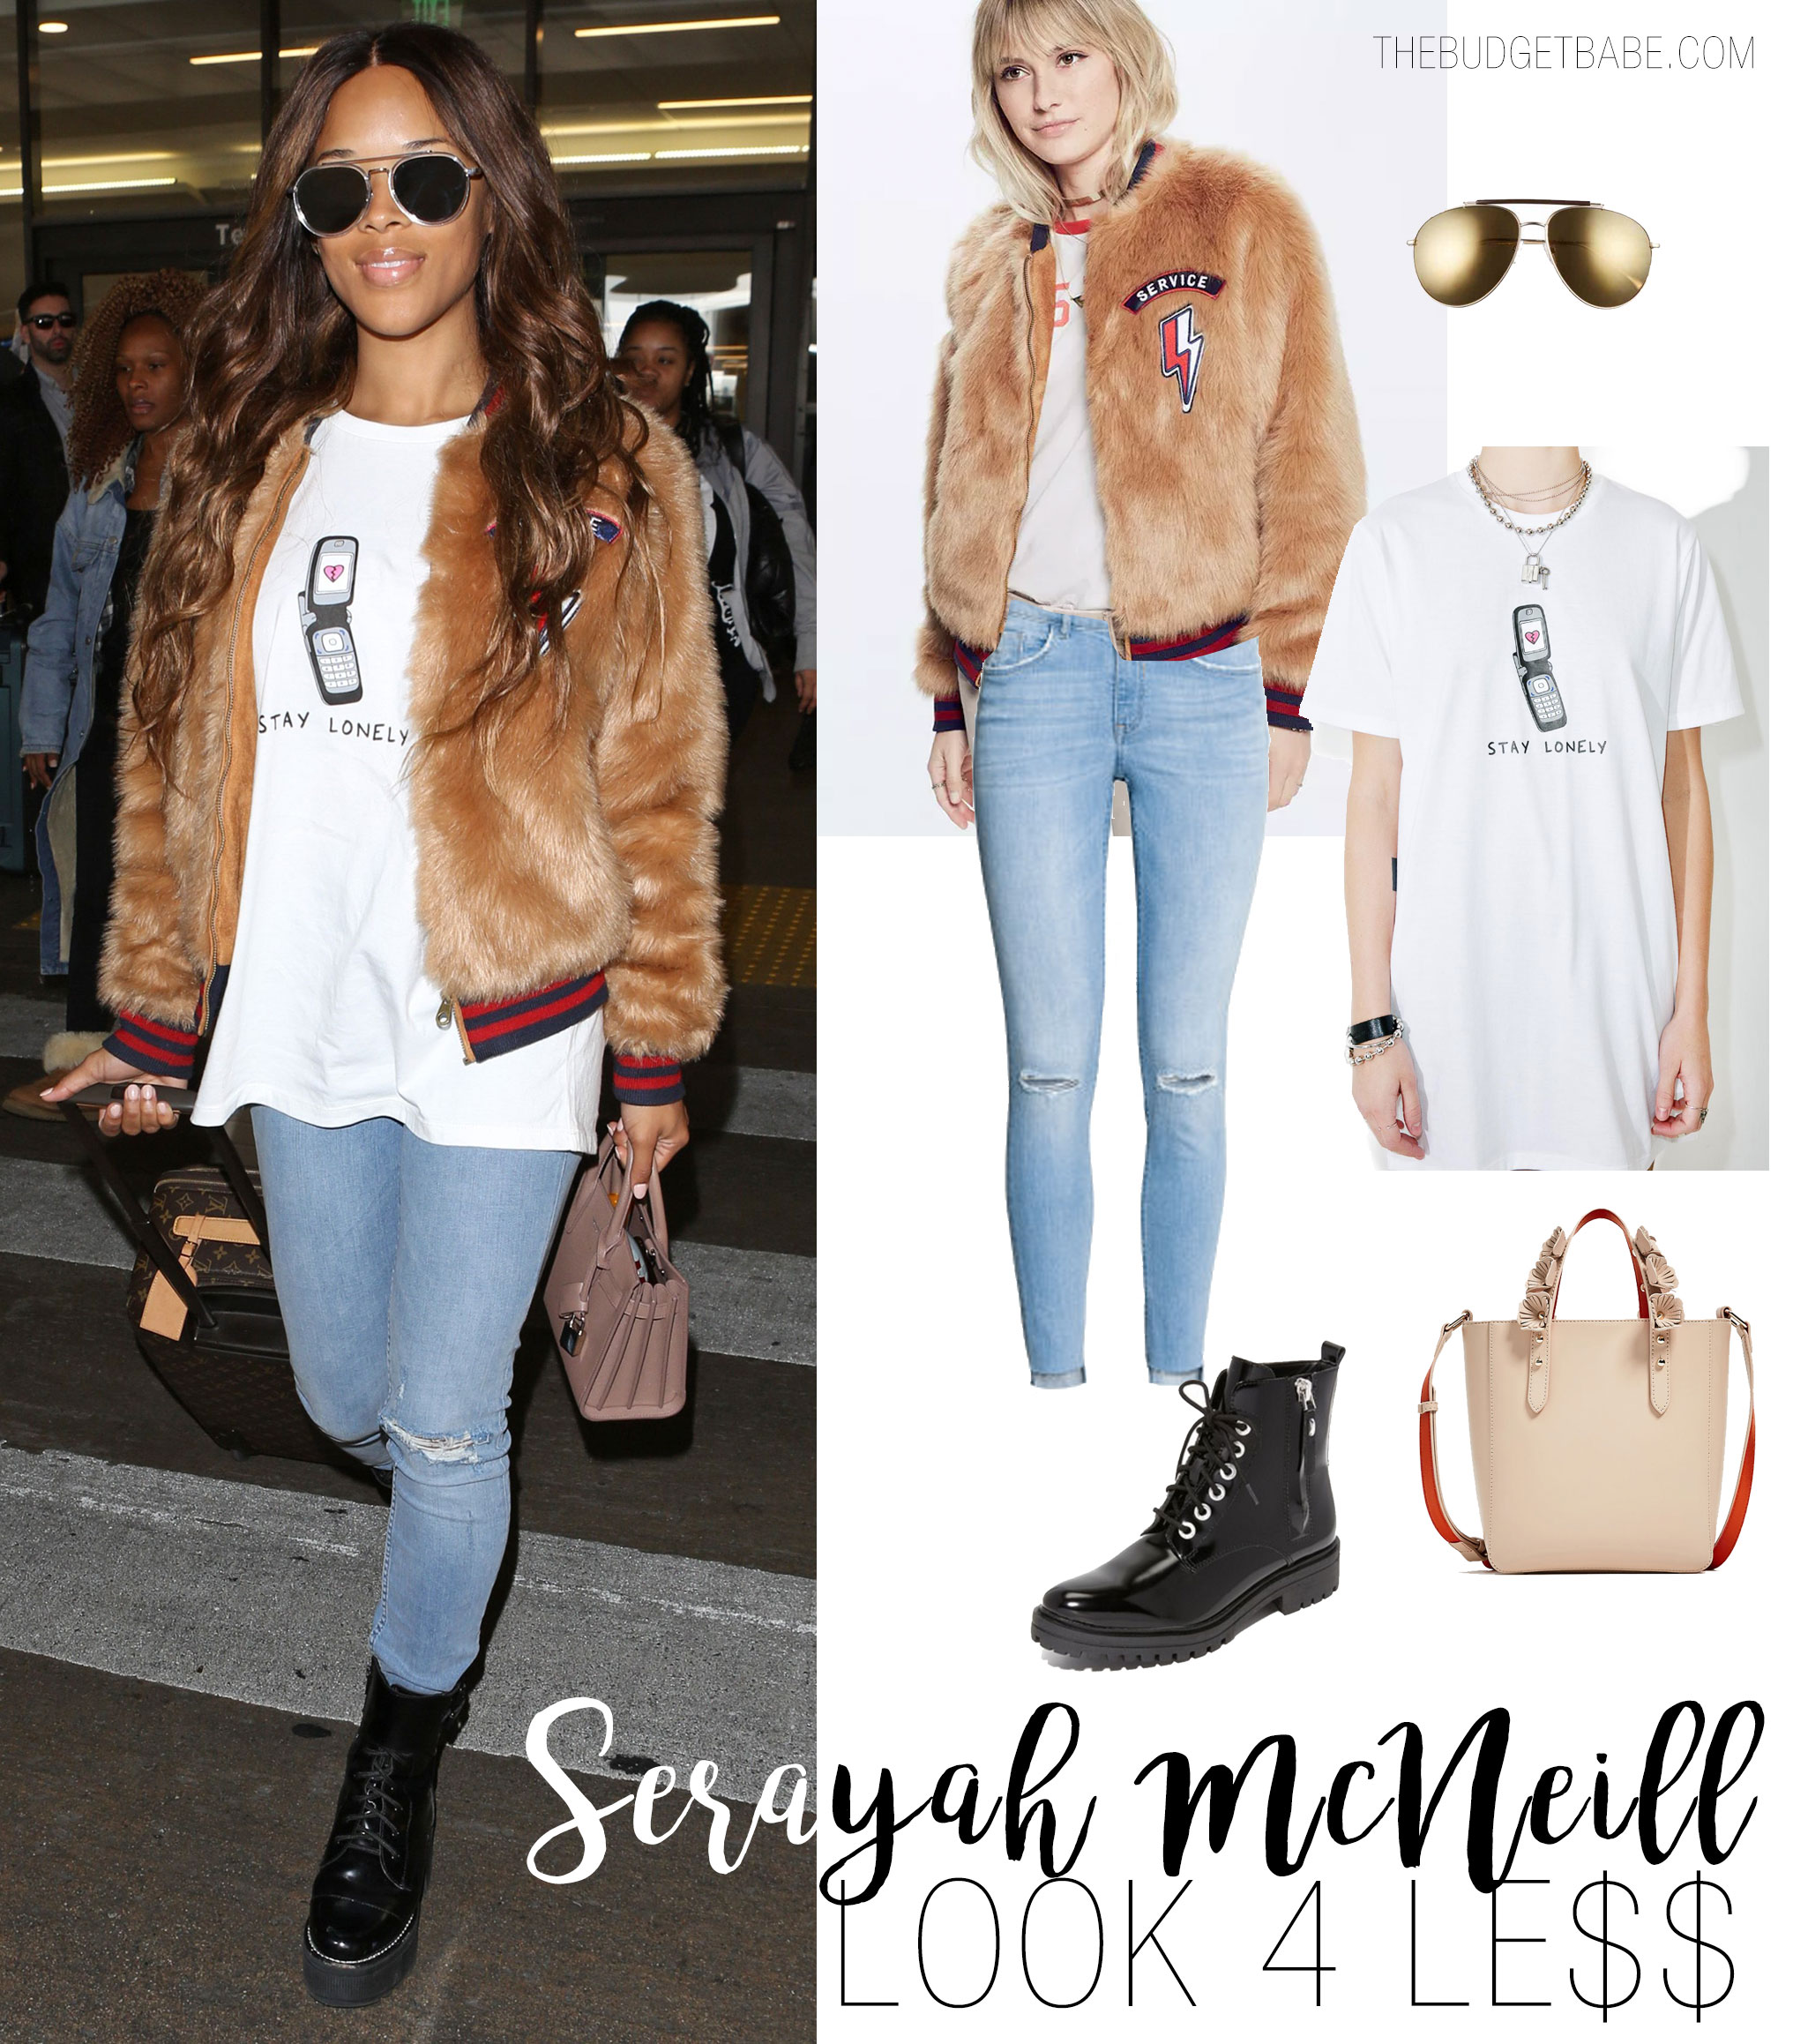 Serayah McNeill looks edgy and effortless in her Mother faux fur bomber jacket.